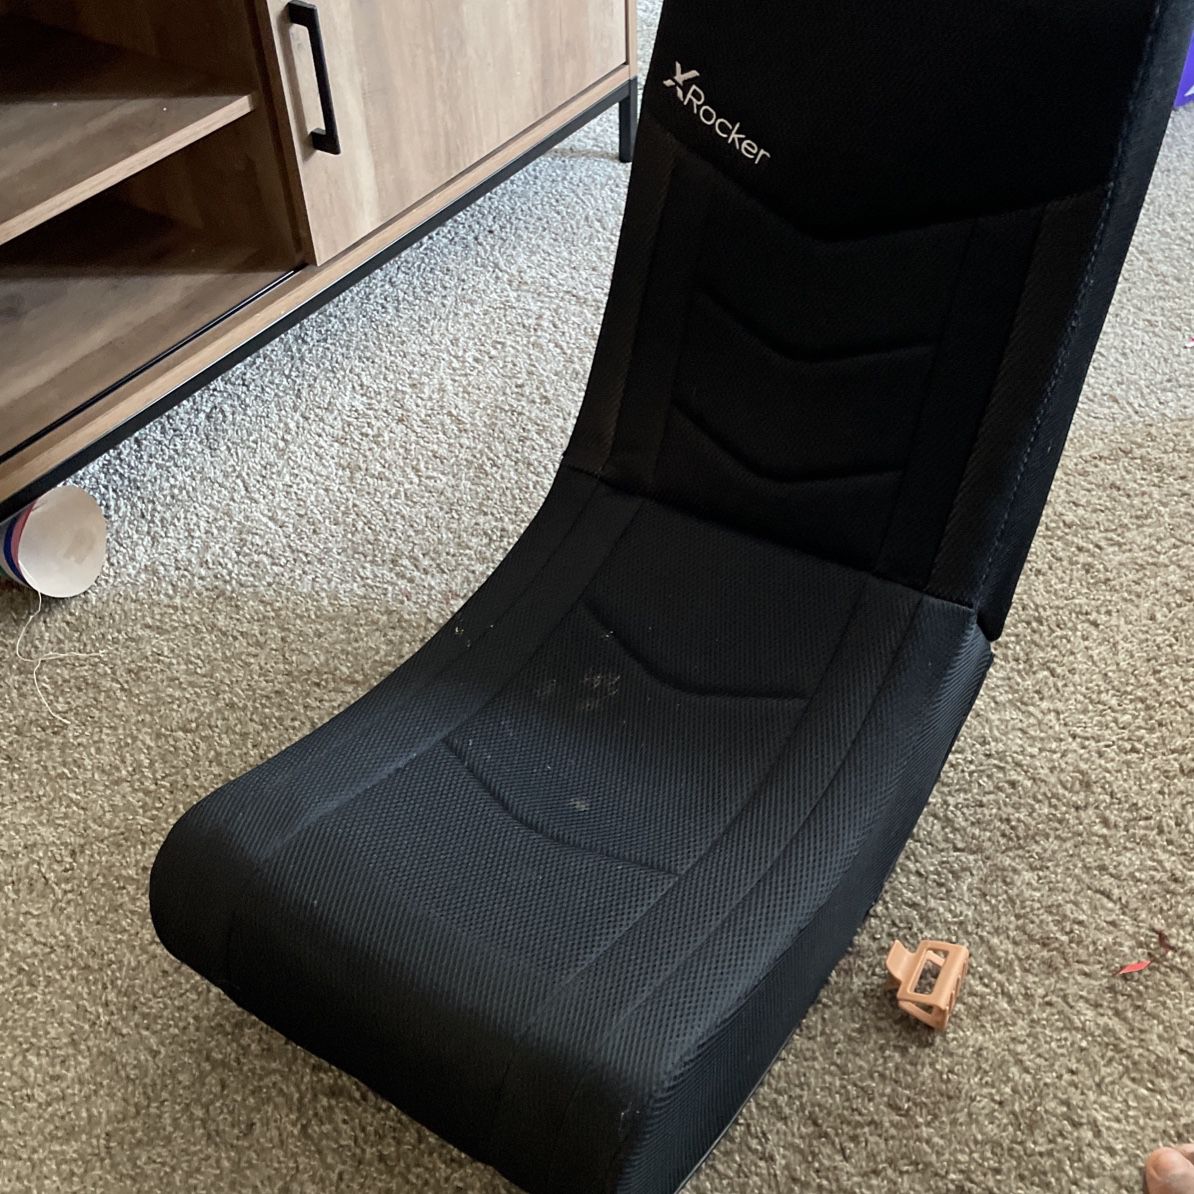 2 Gaming Chairs 30$ Each With Speakers Built In